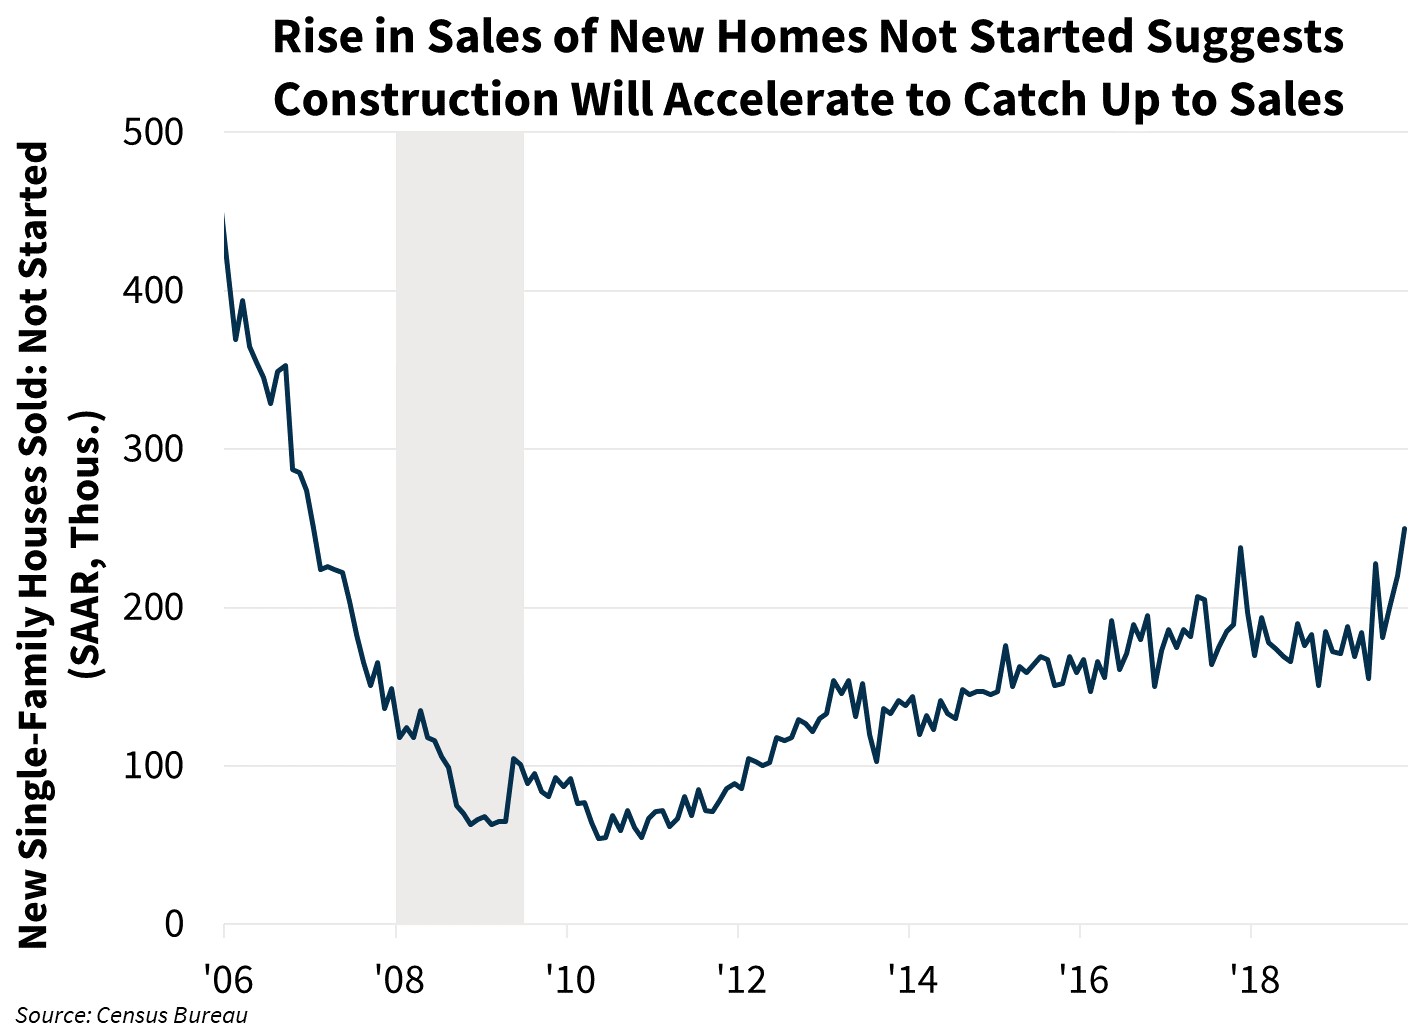 Rise in Sales of New Homes Not Started Suggests Construction Will Accelerate to Catch Up to Sales